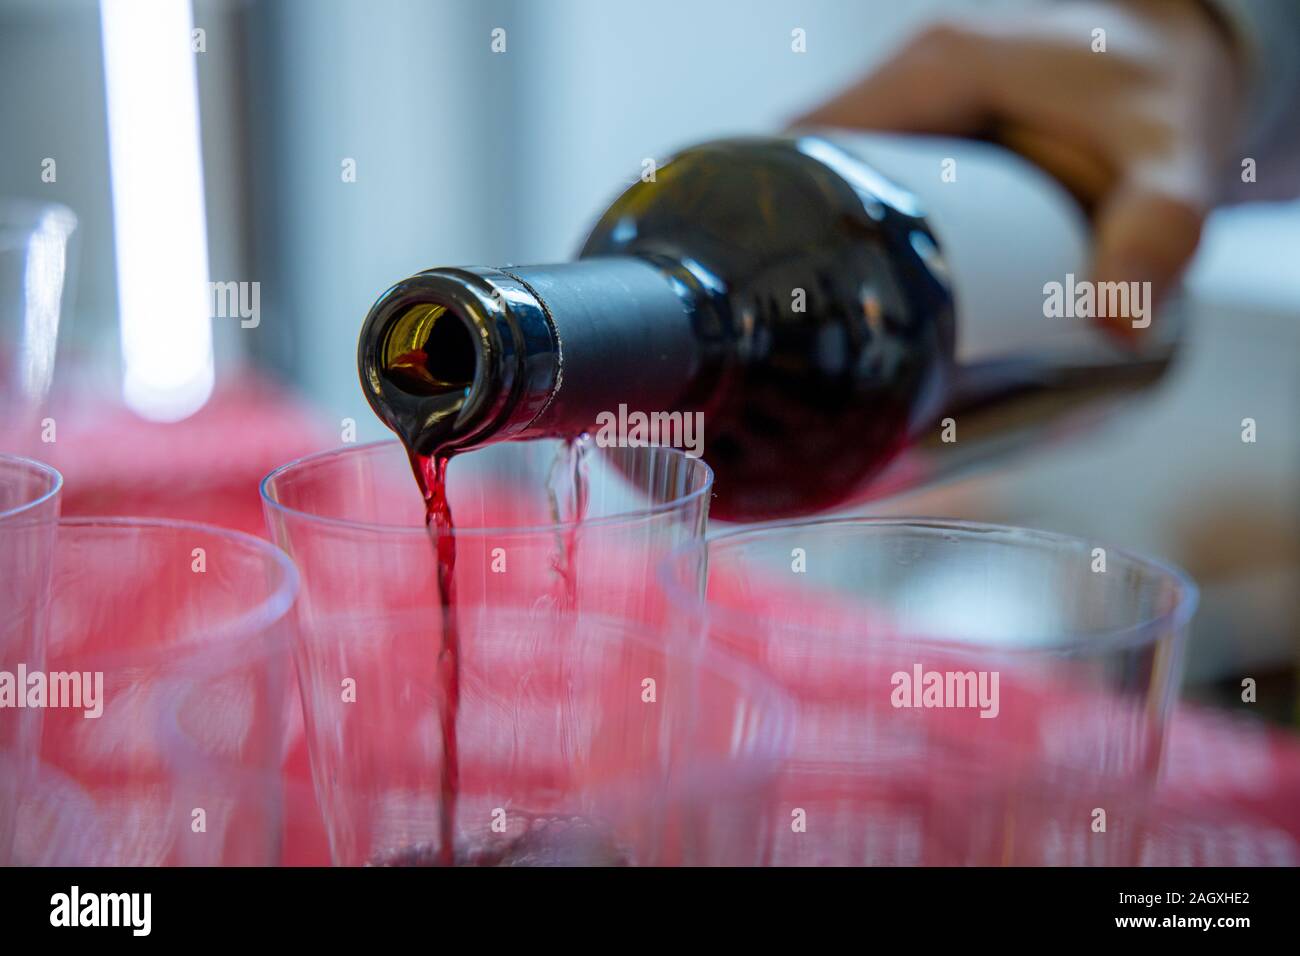 Man pouring red wine into glasses Stock Photo